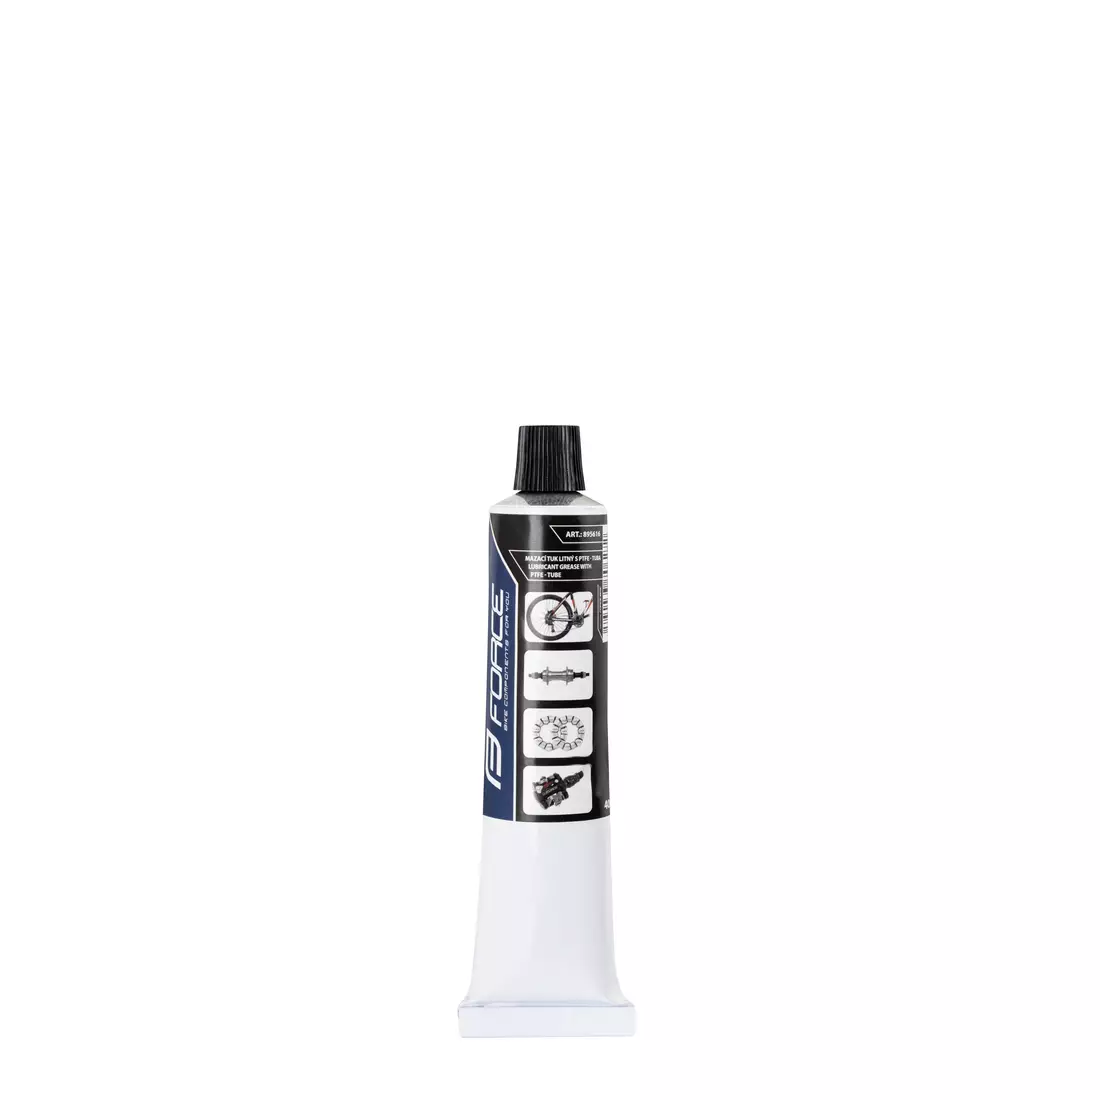 FORCE Bicycle grease with PTFE (Teflon), 40ml 895616